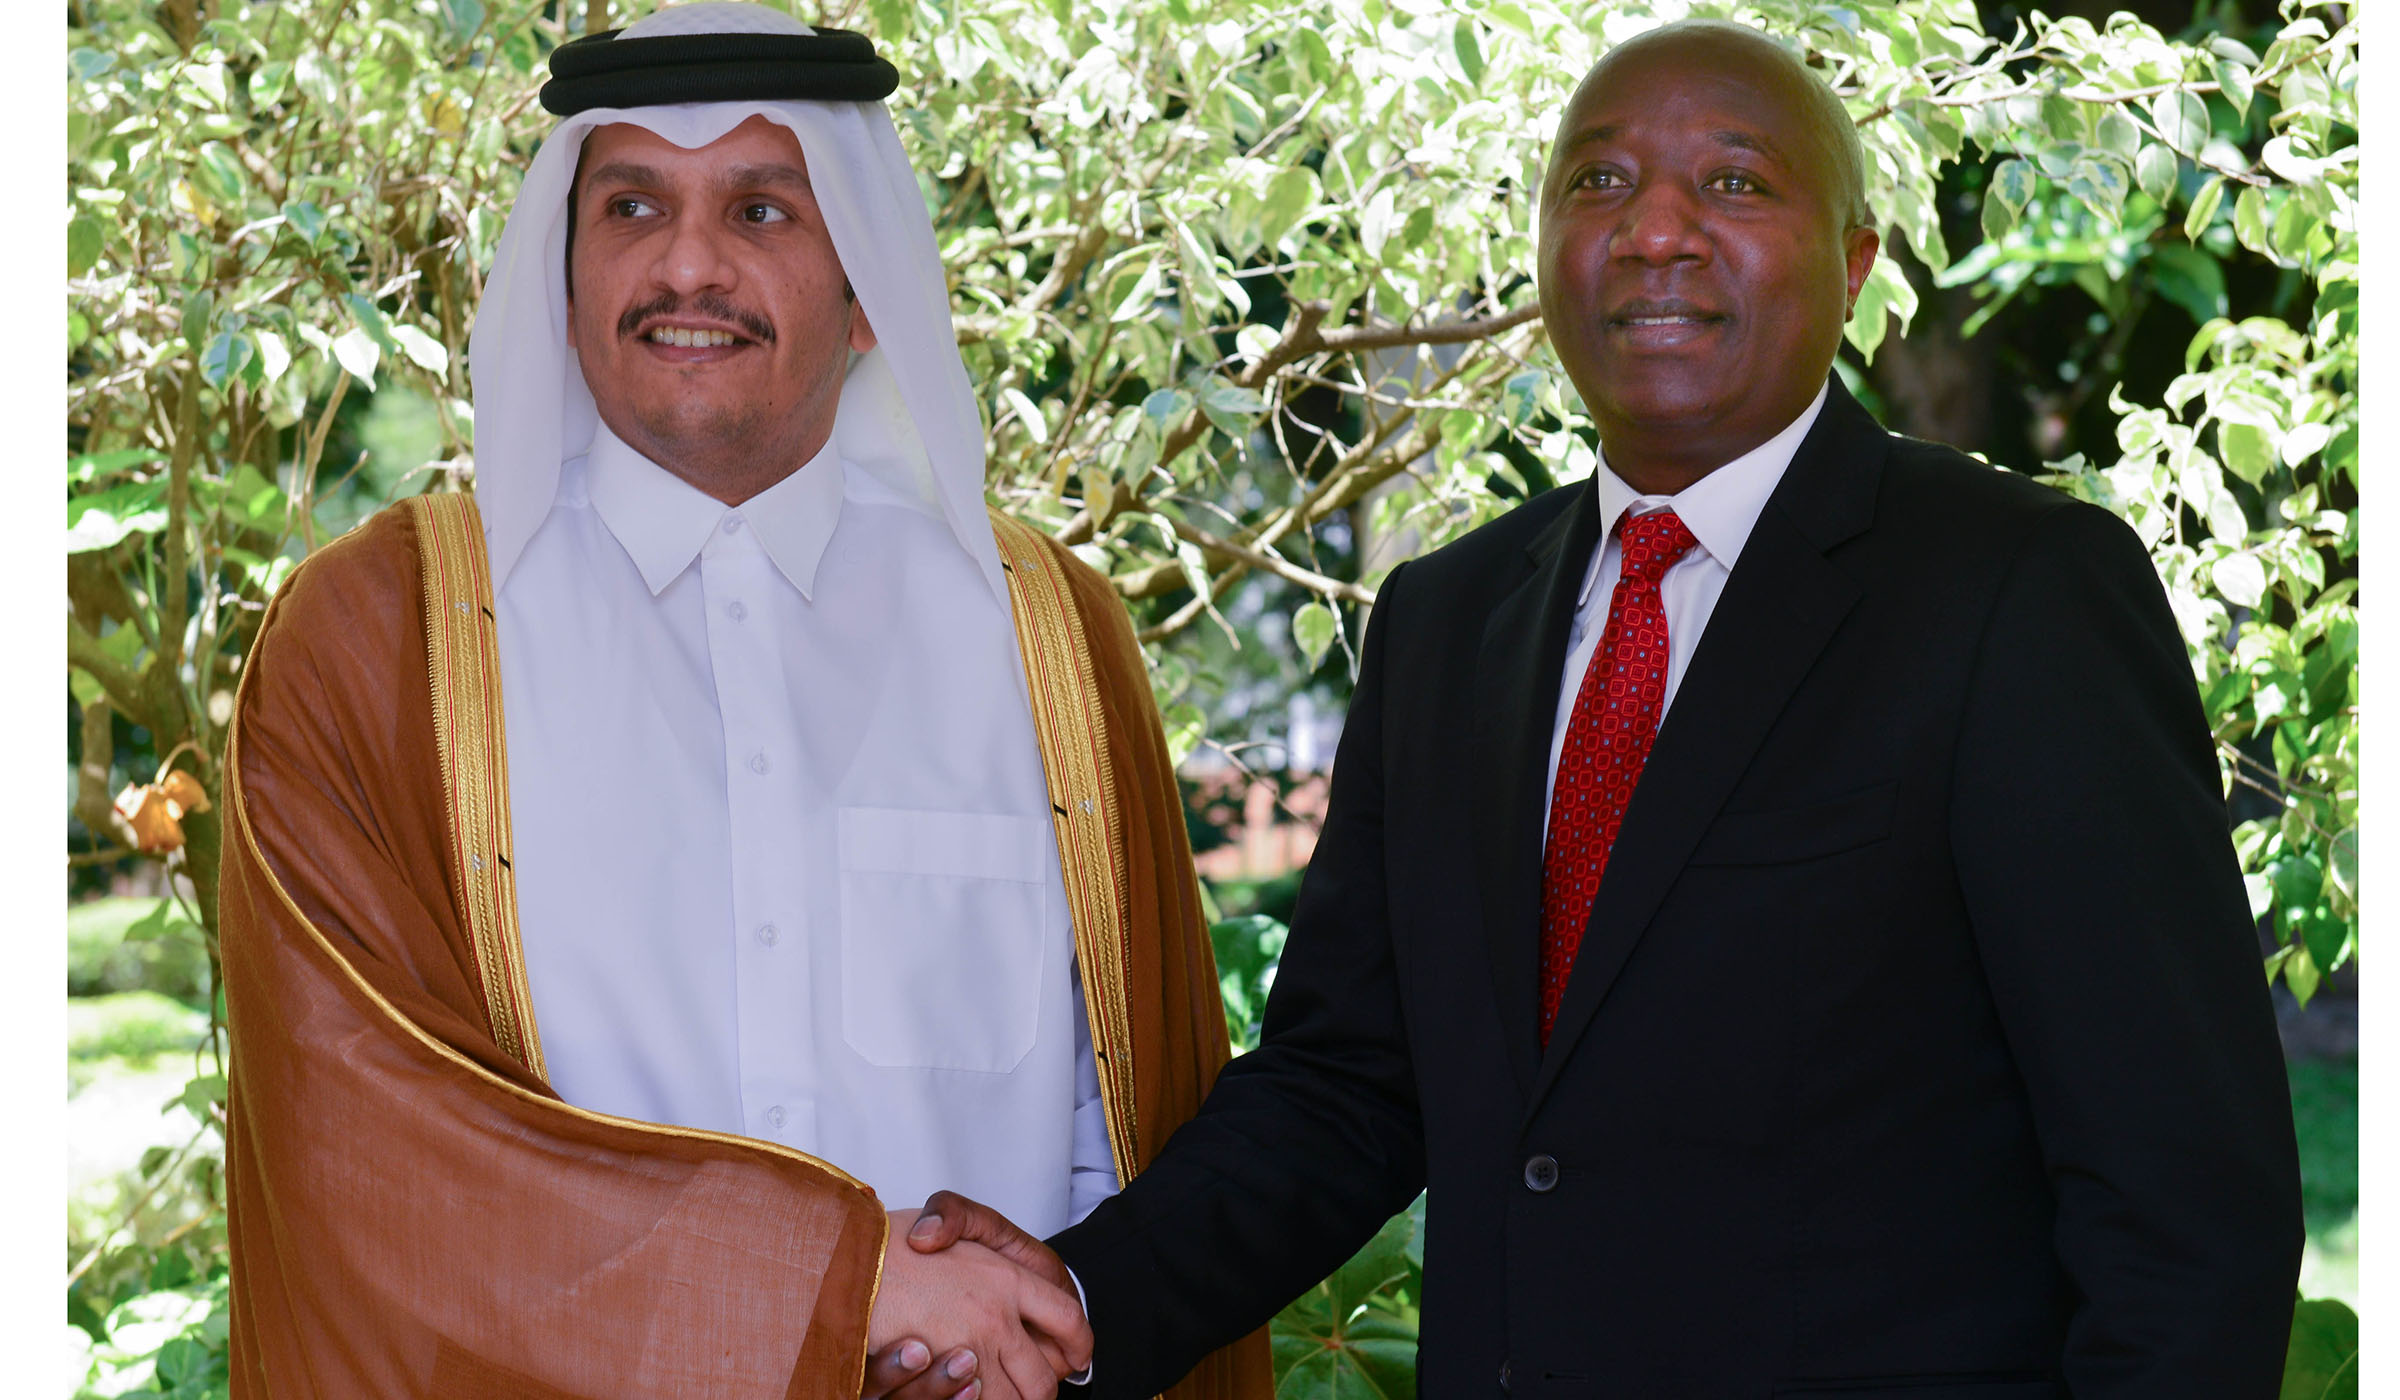 Prime Minister Dr. Edouard Ngirente received H.E. Sheikh Mohamed bin Abdulrahman Al Thani, the Deputy Prime Minister and Minister of Foreign Affairs of Qatar and his delegation yesterday (Courtesy)